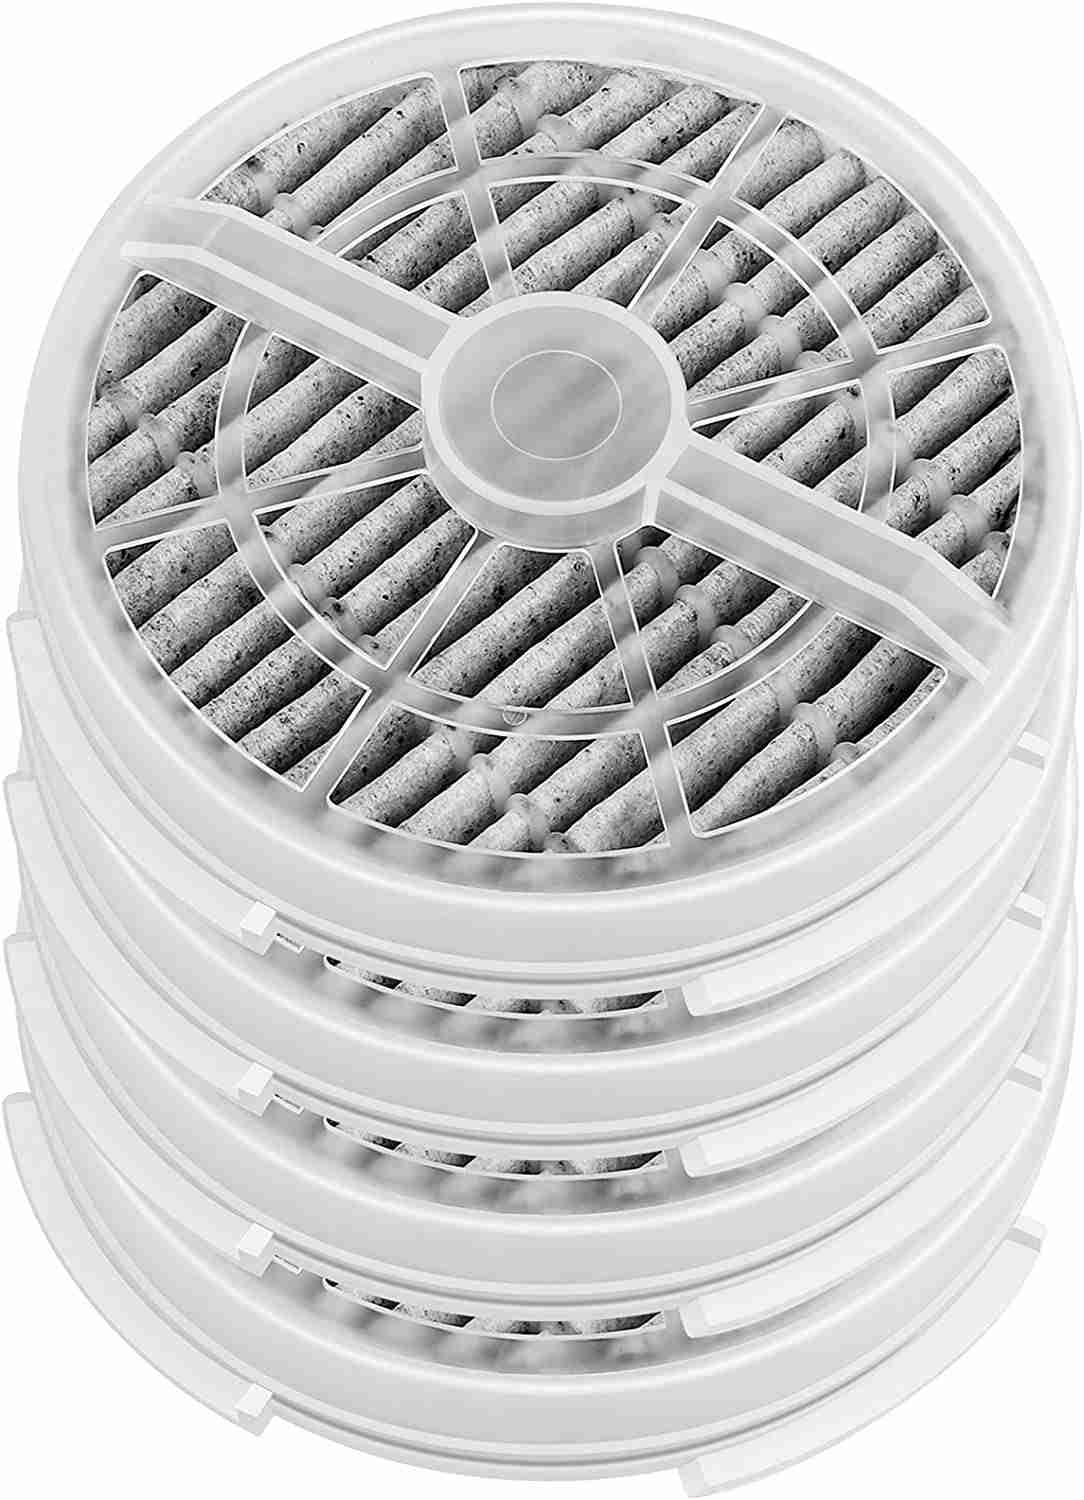 KEEPOW HEPA Replacement Filter for Rigoglioso Air Purifier